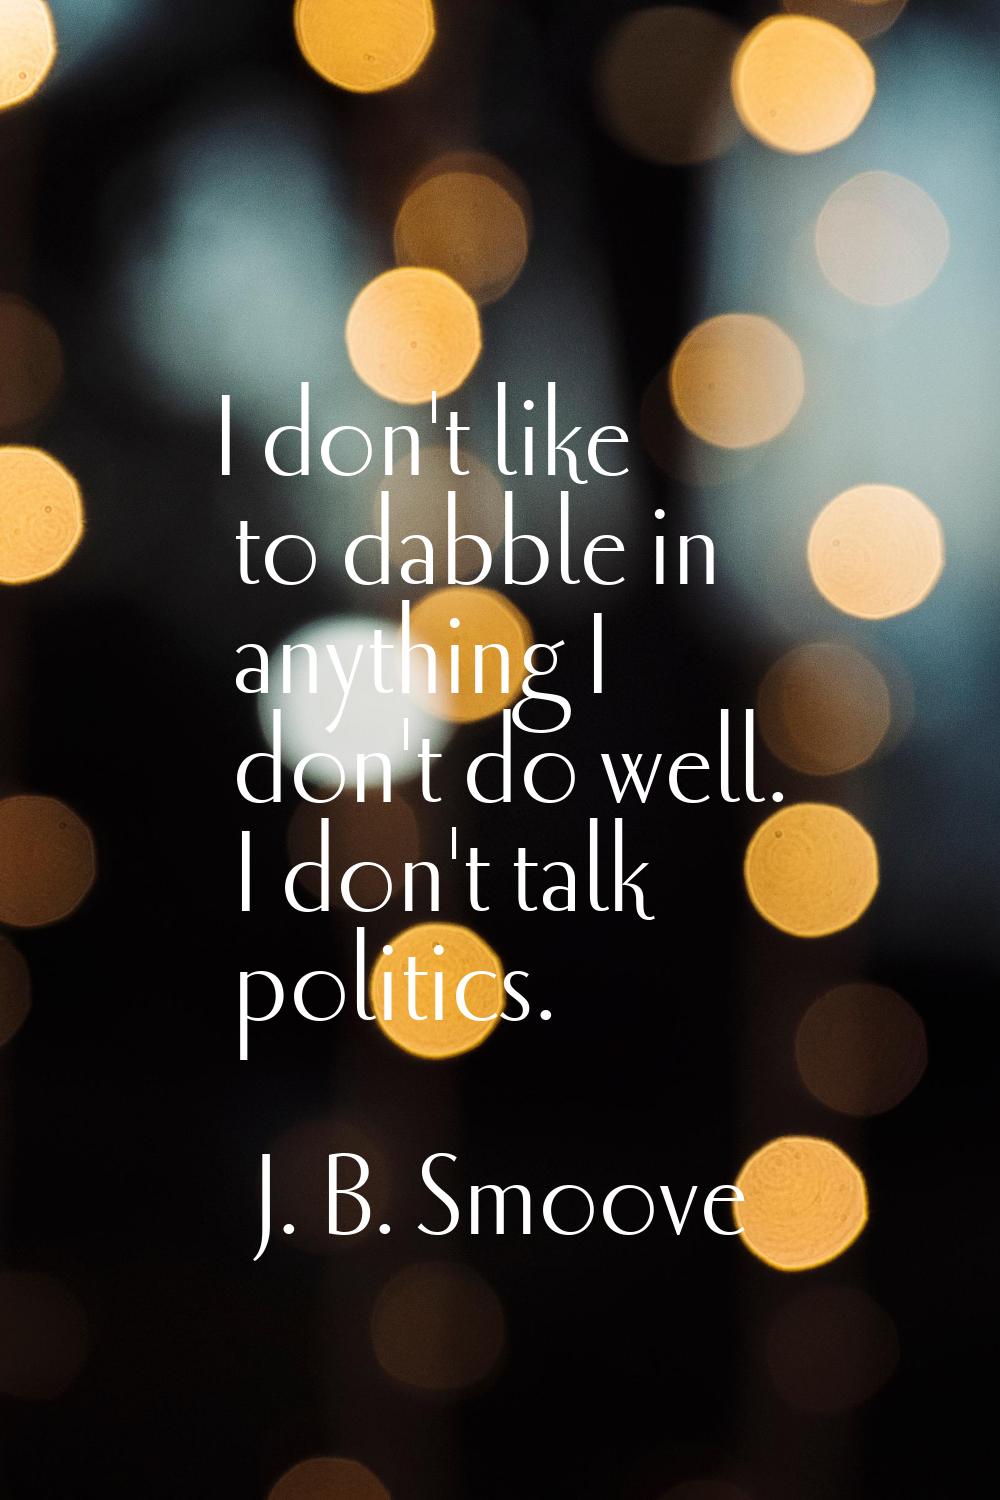 I don't like to dabble in anything I don't do well. I don't talk politics.